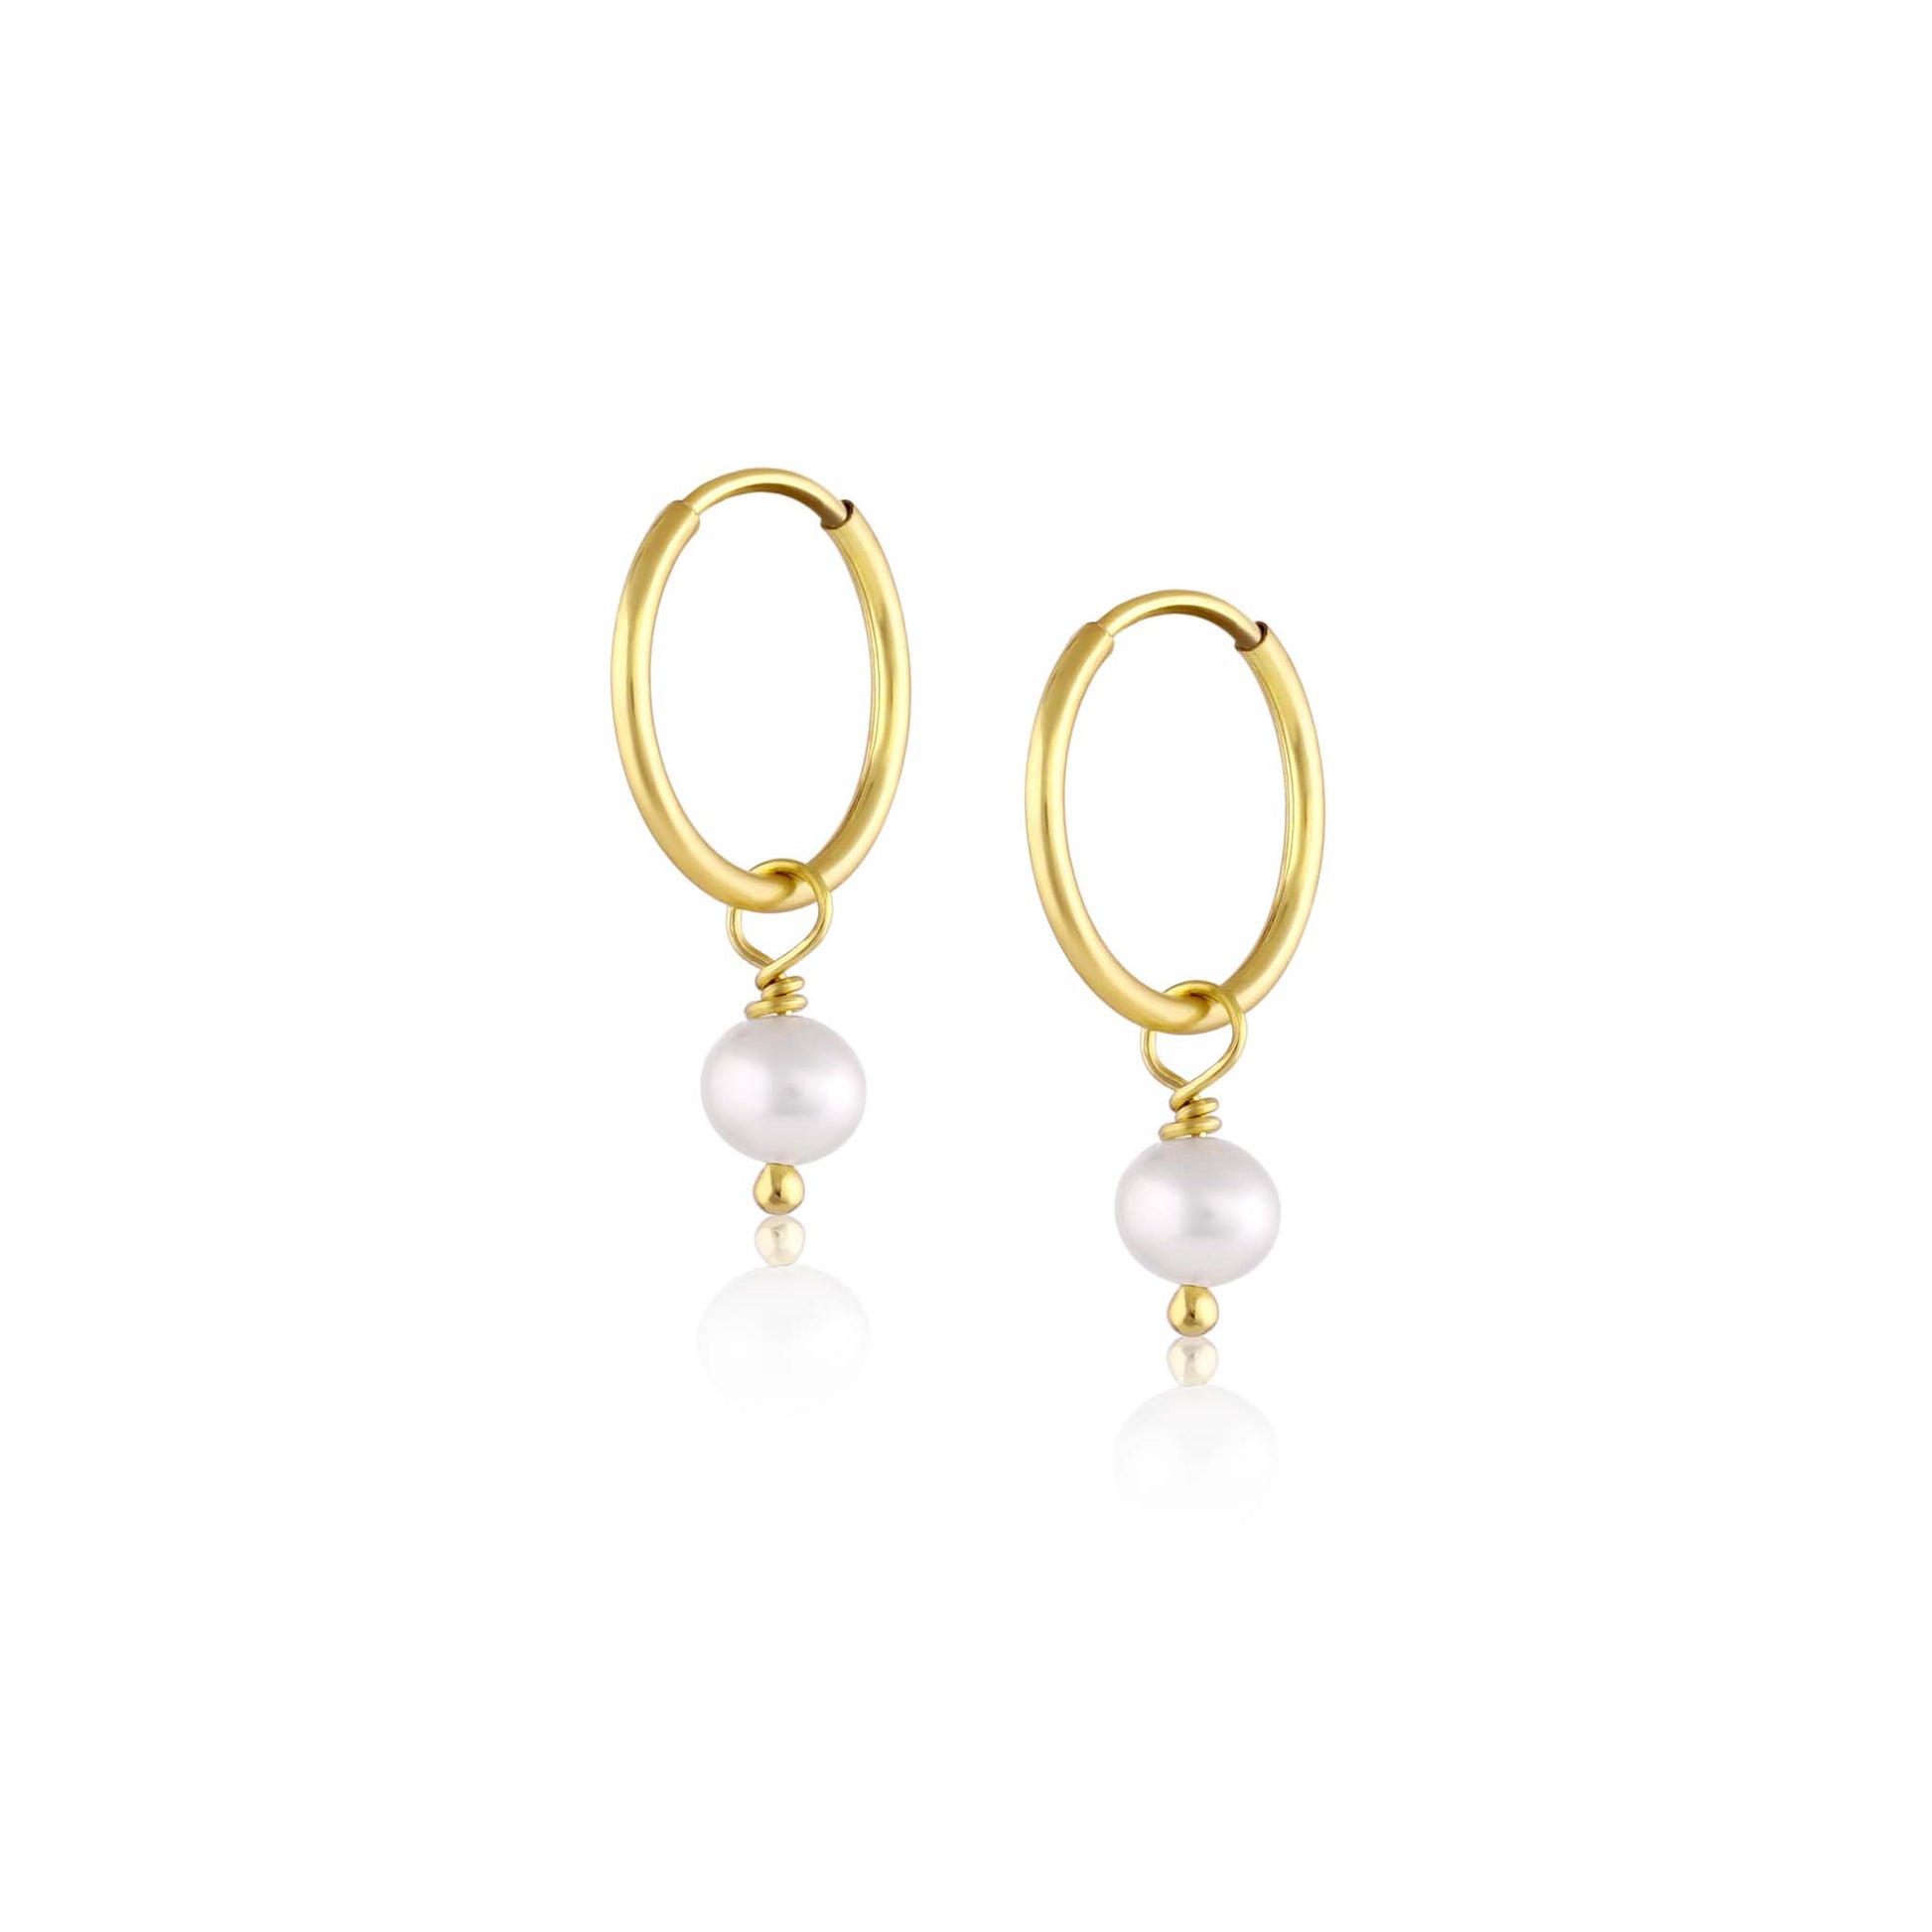 BORN TO ROCK® Jewelry | 14Kt Gold plated Freshwater pearl Charm Hoop Earrings | Discover our beautiful collection of hoop earrings at borntorockjewelry.com.  Shop Sterling silver or gold plated hoop earrings, earrings with natural gemstones beads, charm hoops and stud earrings. A personalized gift idea for every mom, grandma, bride, bridesmaid, daughter, wife, mother-in-law & loved one. 